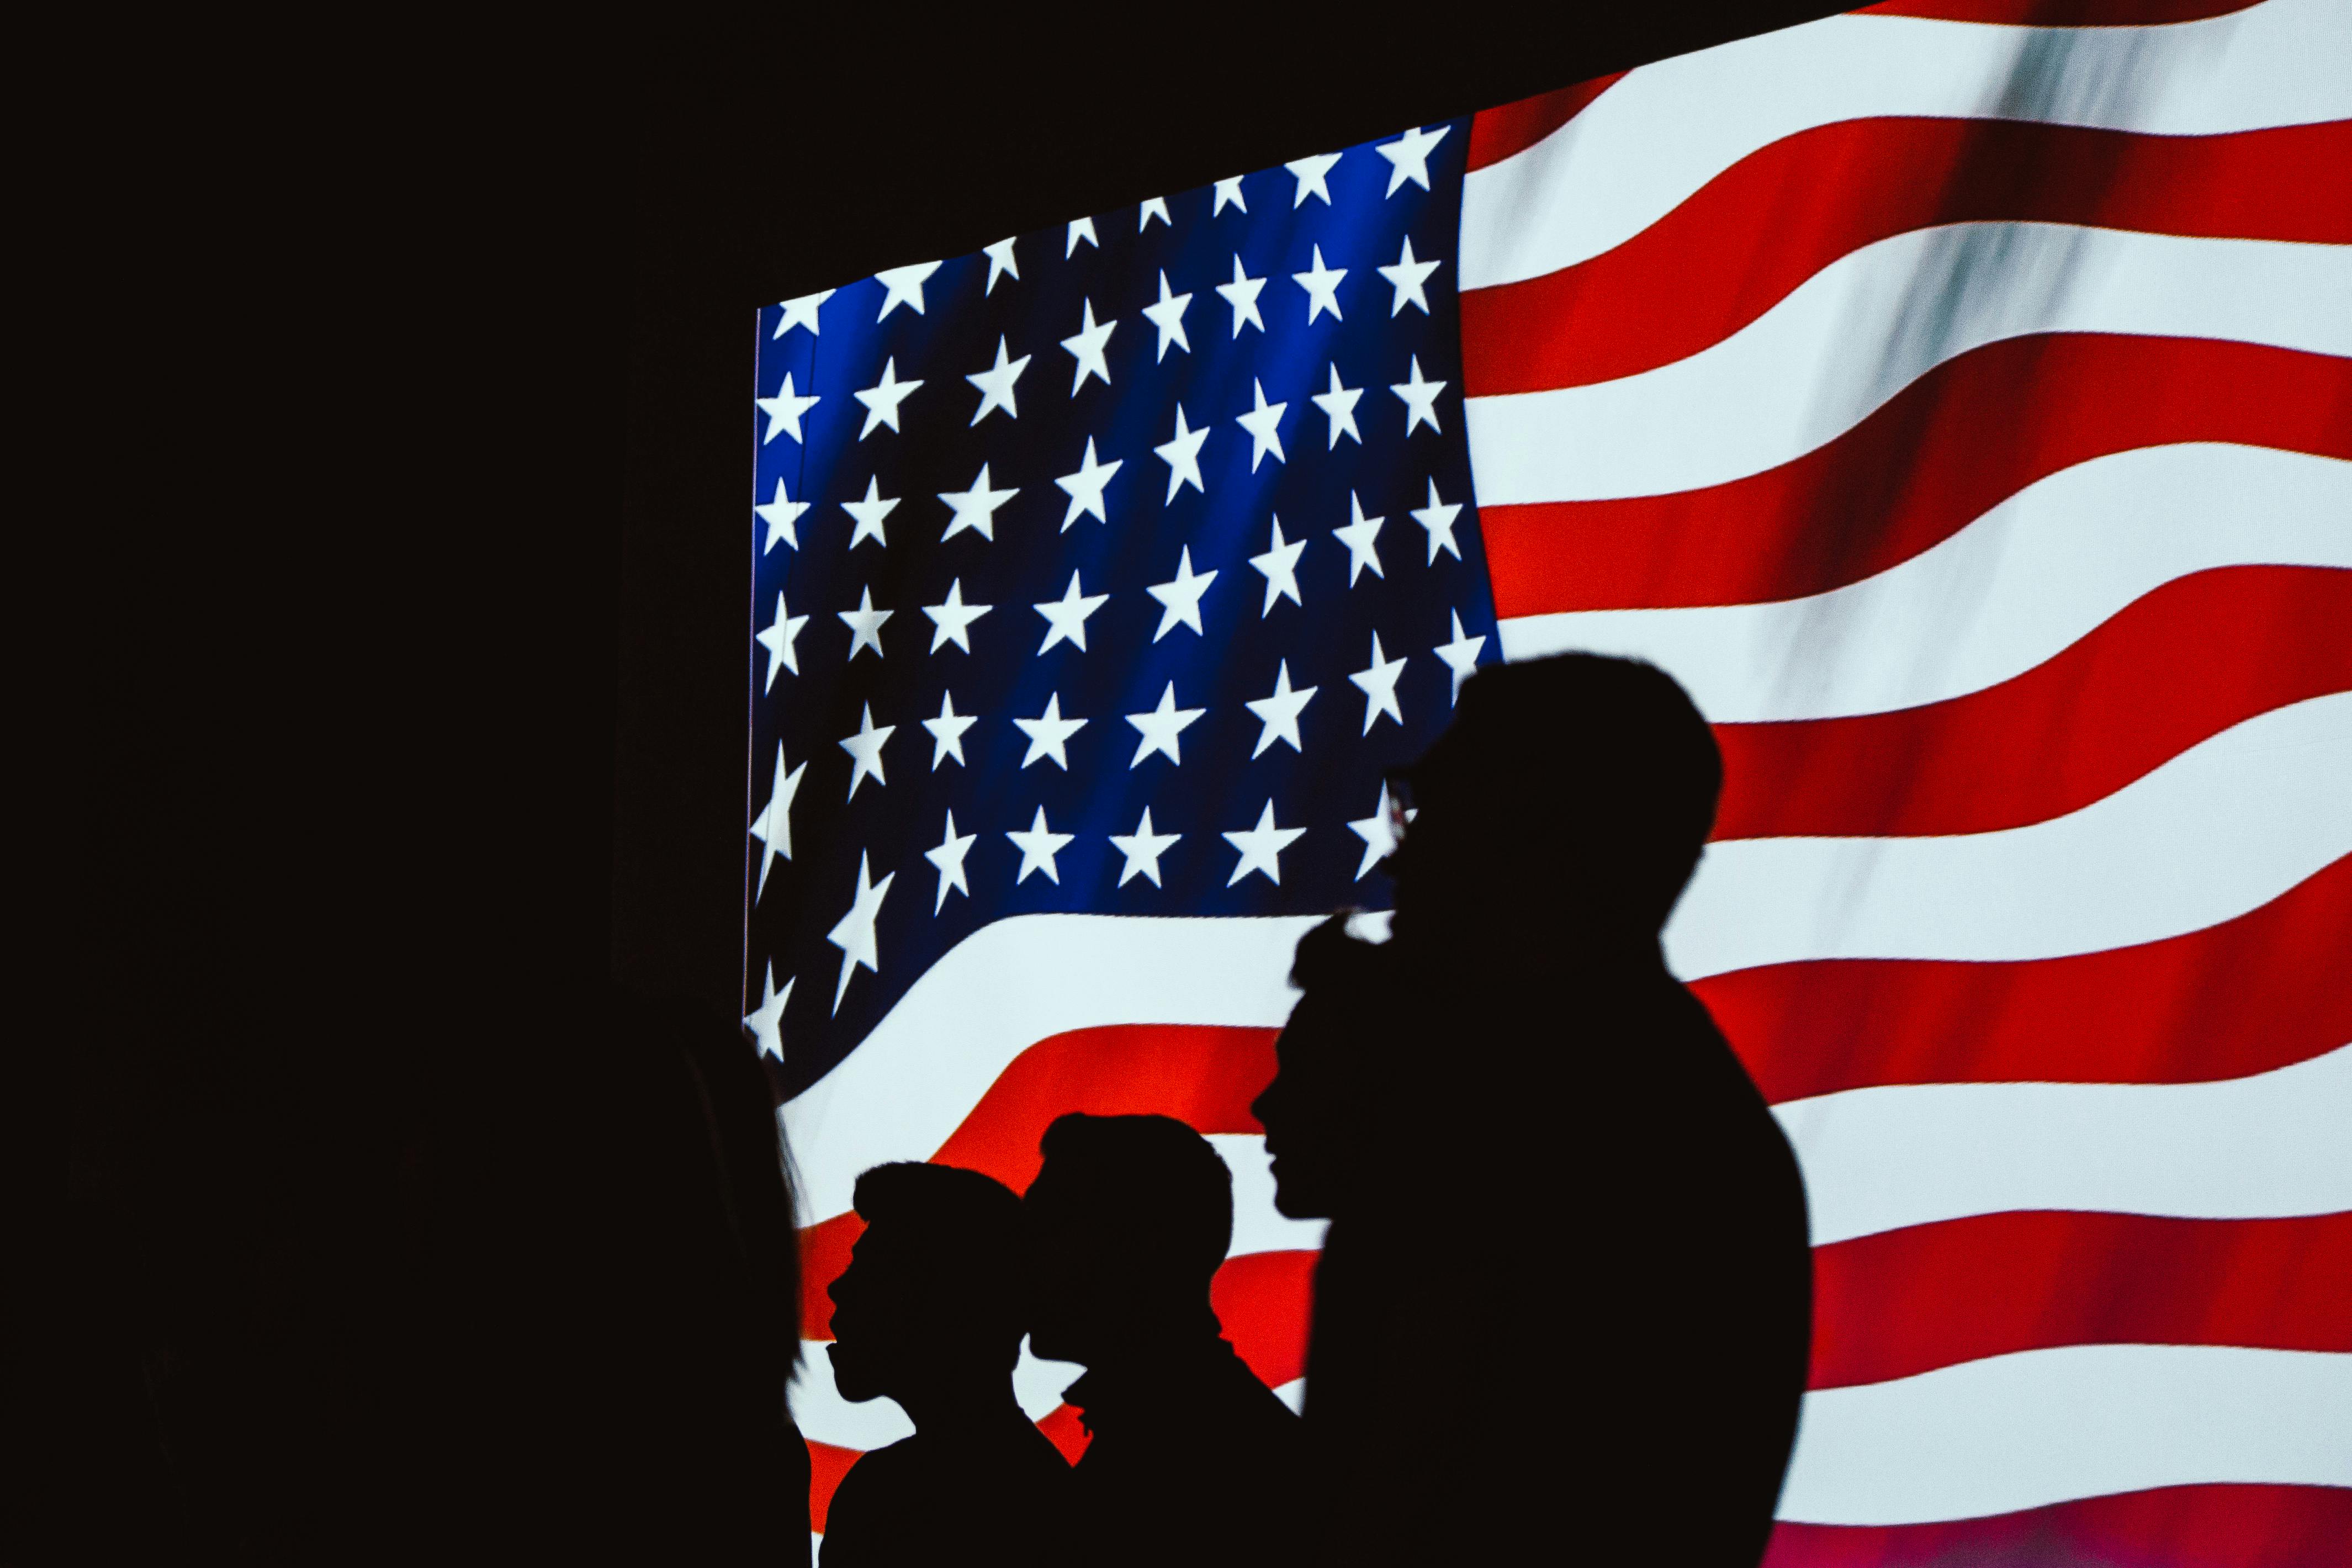 A silhouette of people beside the USA flag